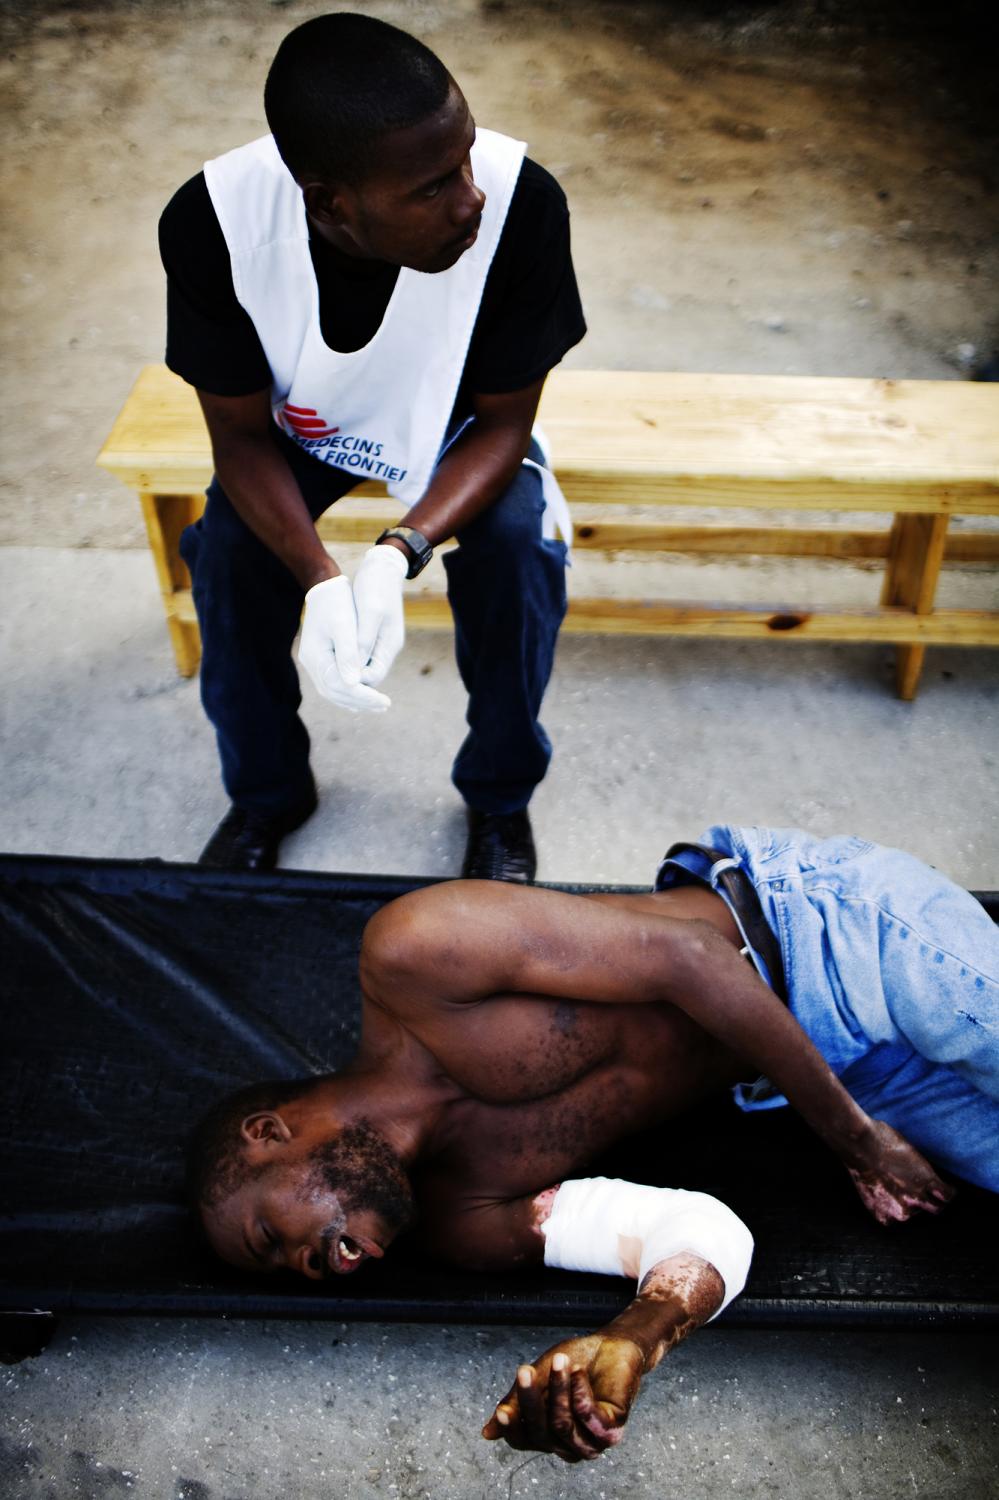 Haiti for MSF - HAITI Martissant, Port-au-Prince
A wounded man with...